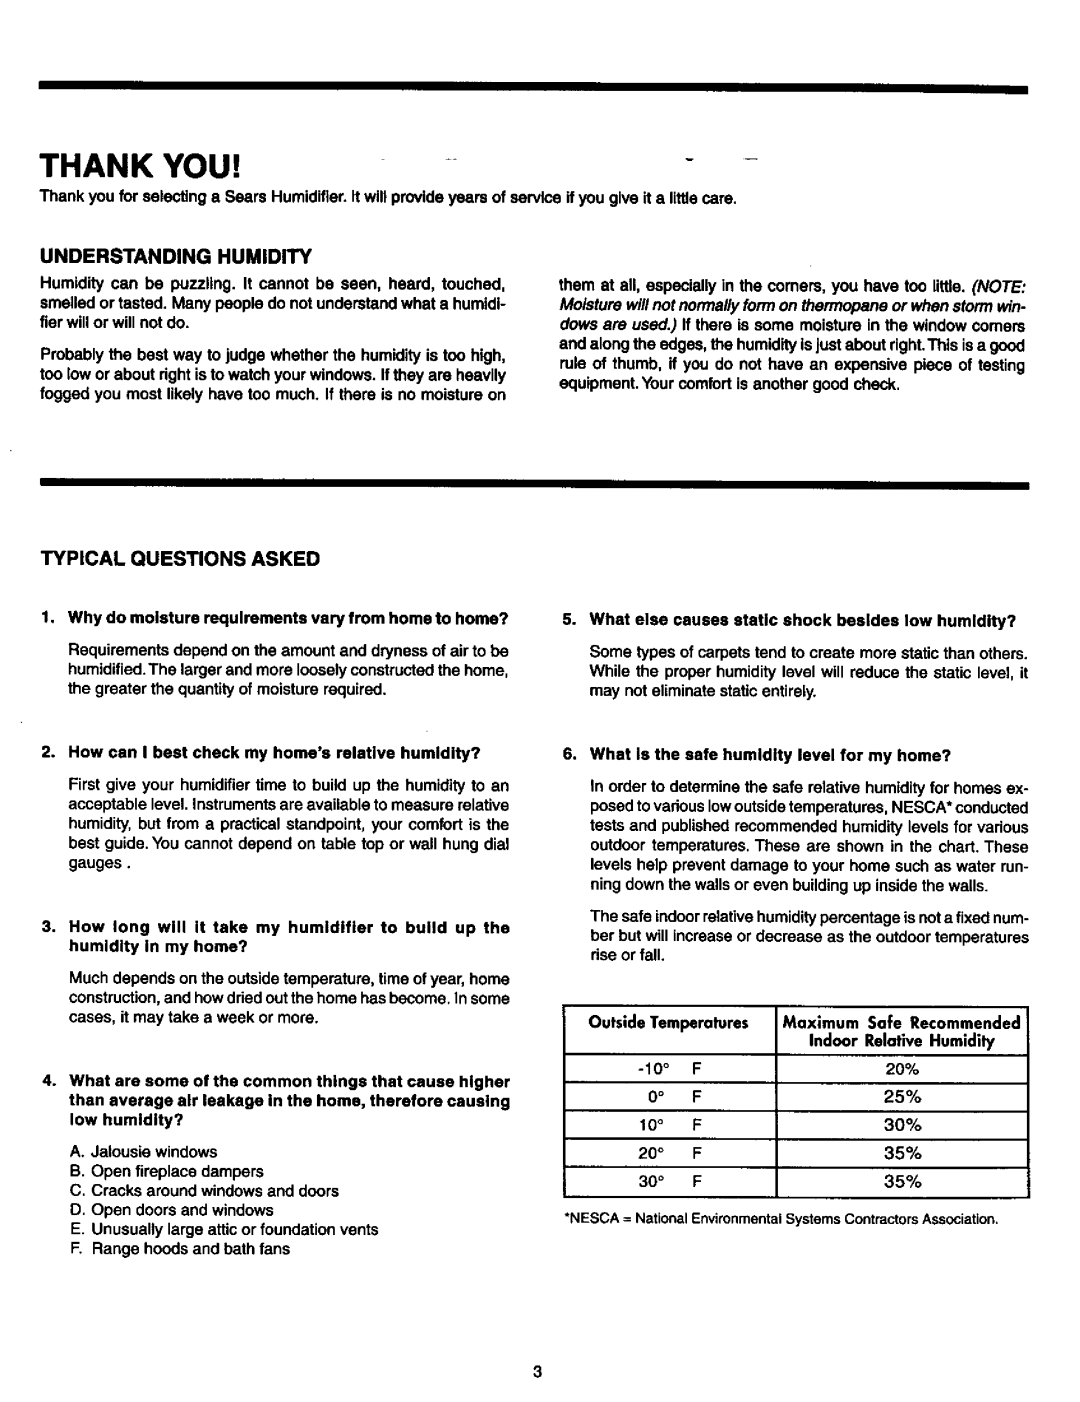 Sears 2500 manual Thank YOU, Typical Questions Asked 